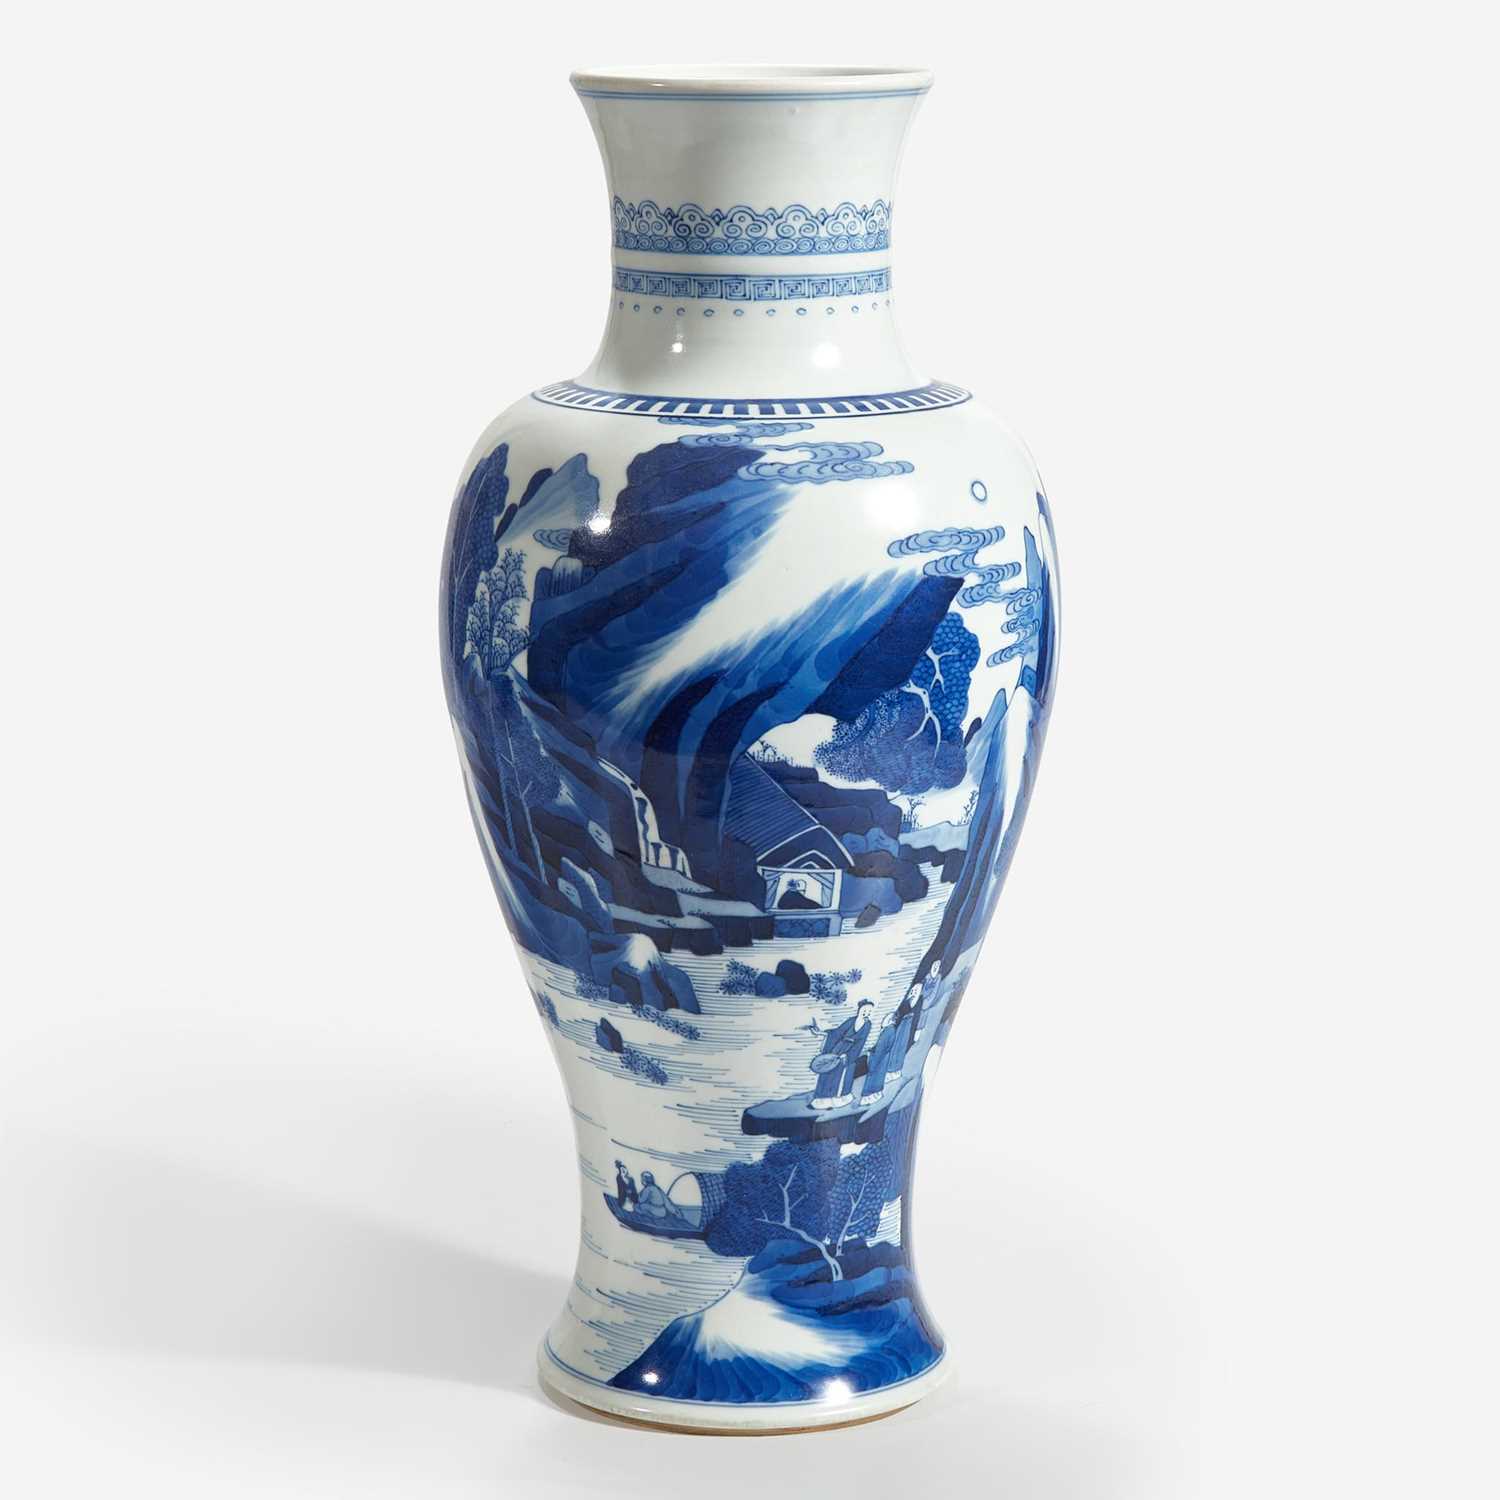 Lot 51 - A Chinese blue and white porcelain baluster vase